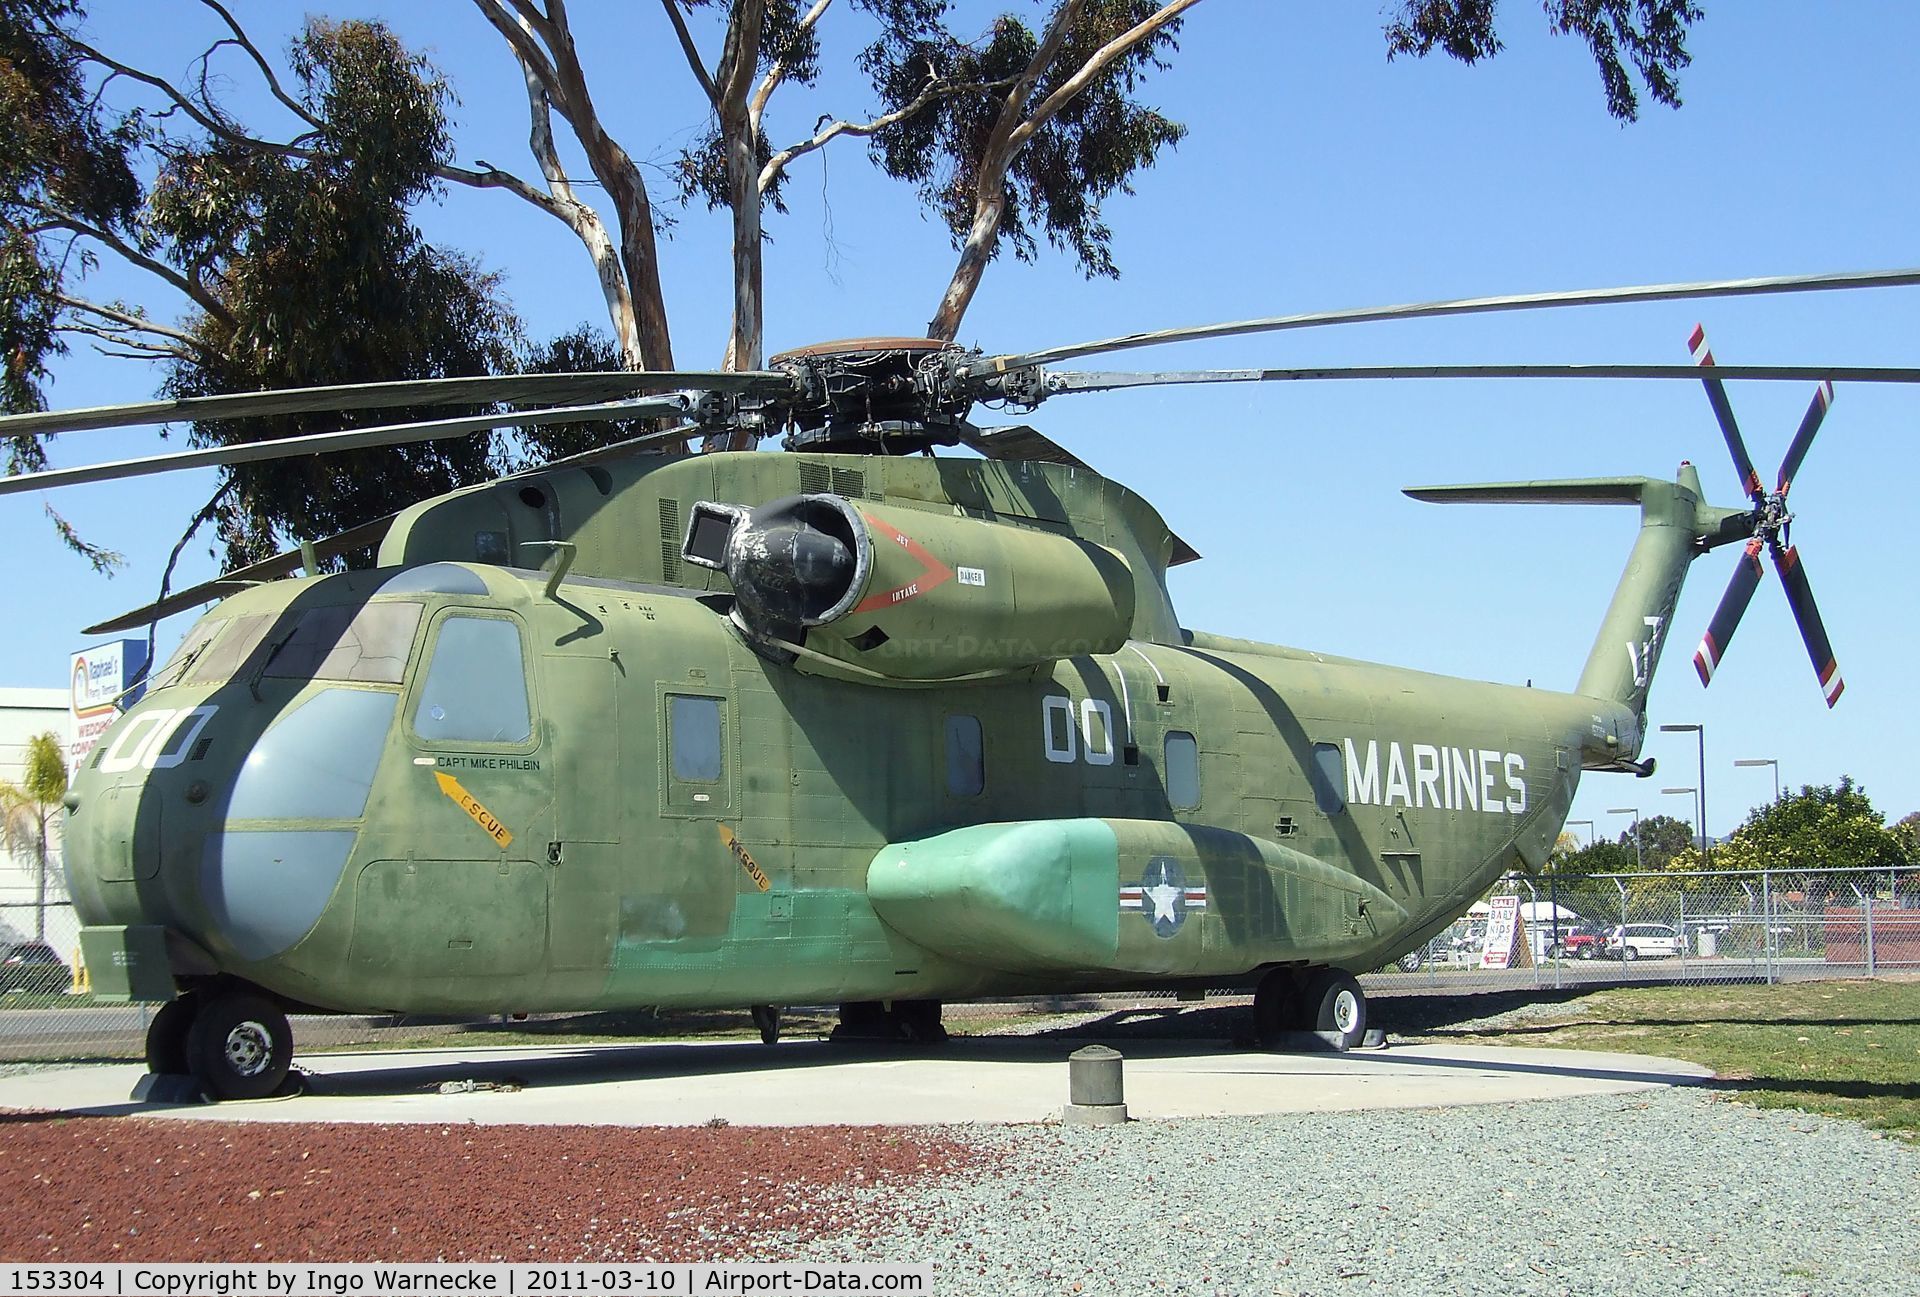 153304, Sikorsky CH-53A Sea Stallion C/N 65-081, Sikorsky CH-53A Sea Stallion at the Flying Leatherneck Aviation Museum, Miramar CA